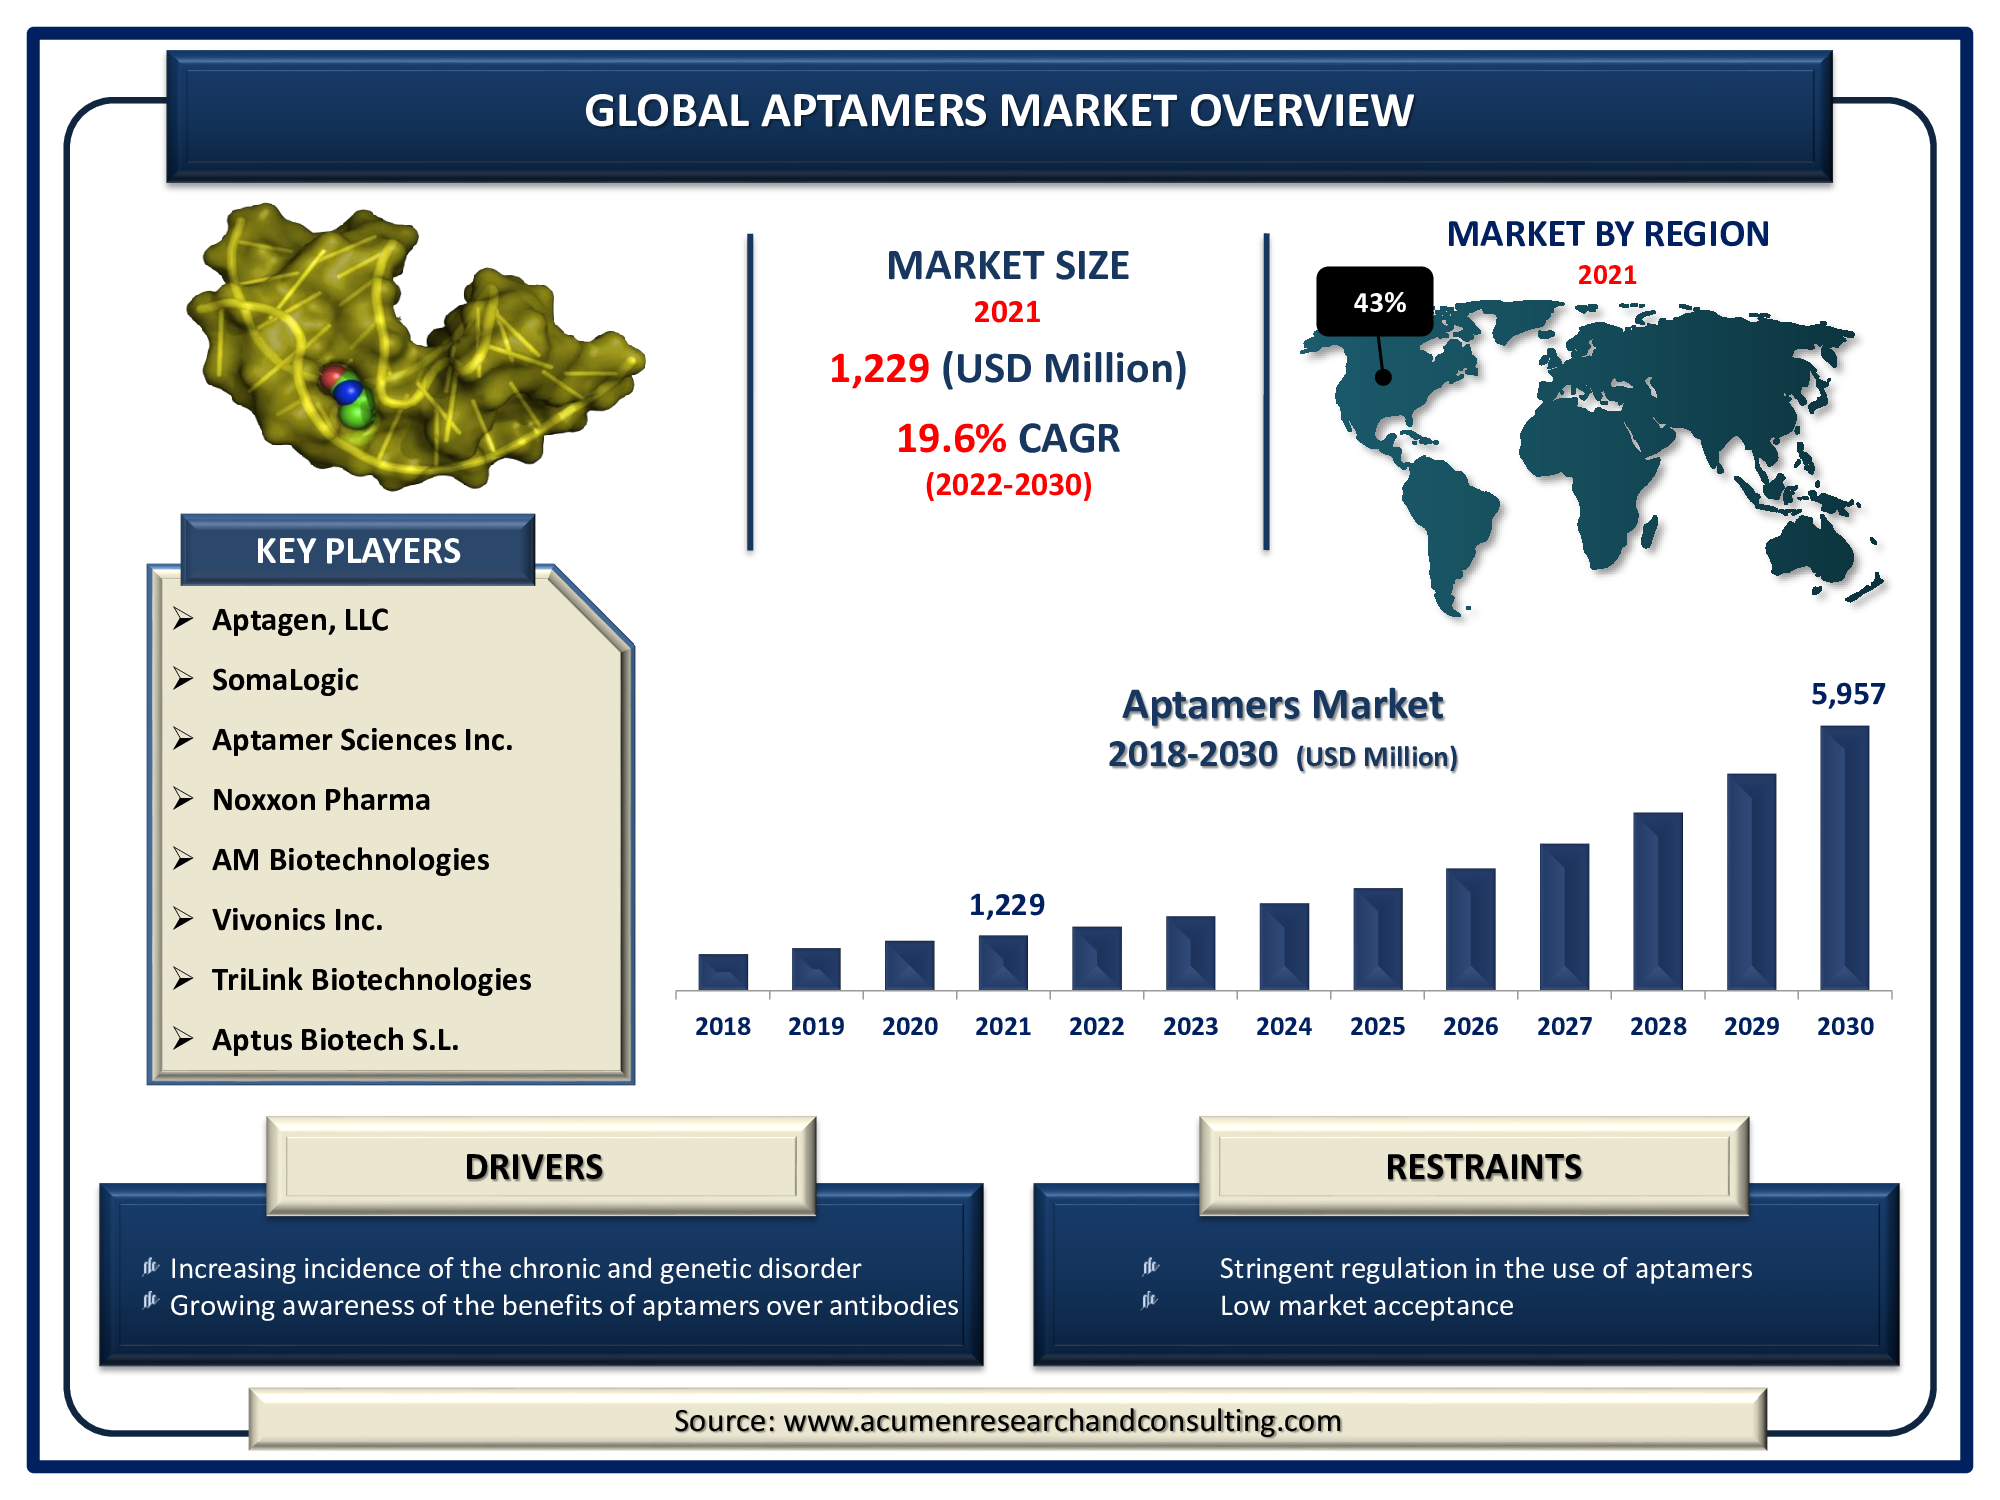 Aptamers Market size accounted for USD 1,229 Million in 2021 and is expected to reach the value of USD 5,957 Million by 2030 at a CAGR of 19.6% during the forecast period from 2022 to 2030.